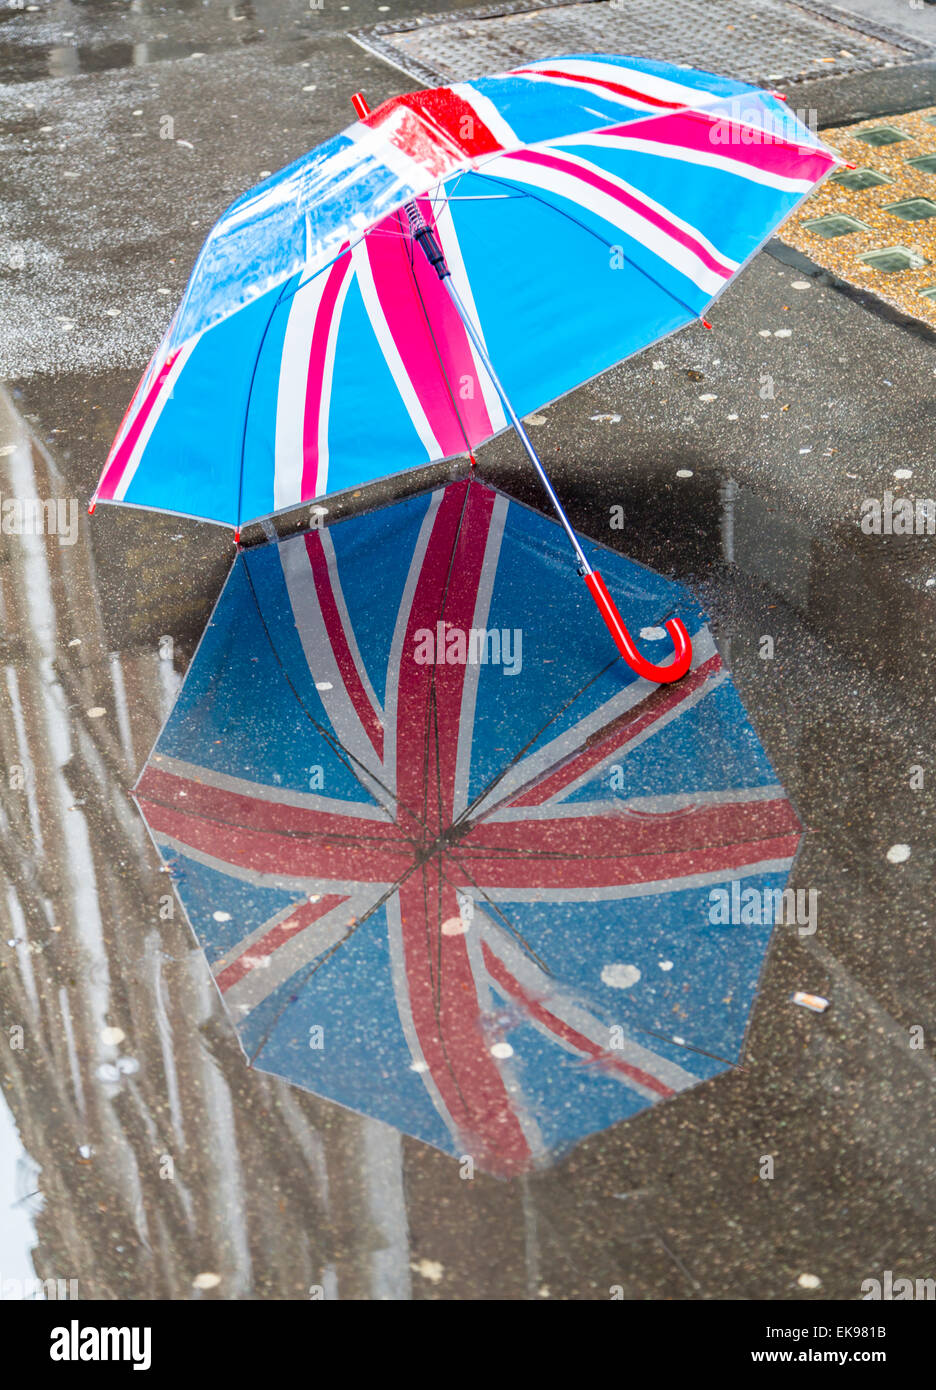 A Union Jack umbrella reflection in a puddle in a raining London Street, London England UK Stock Photo